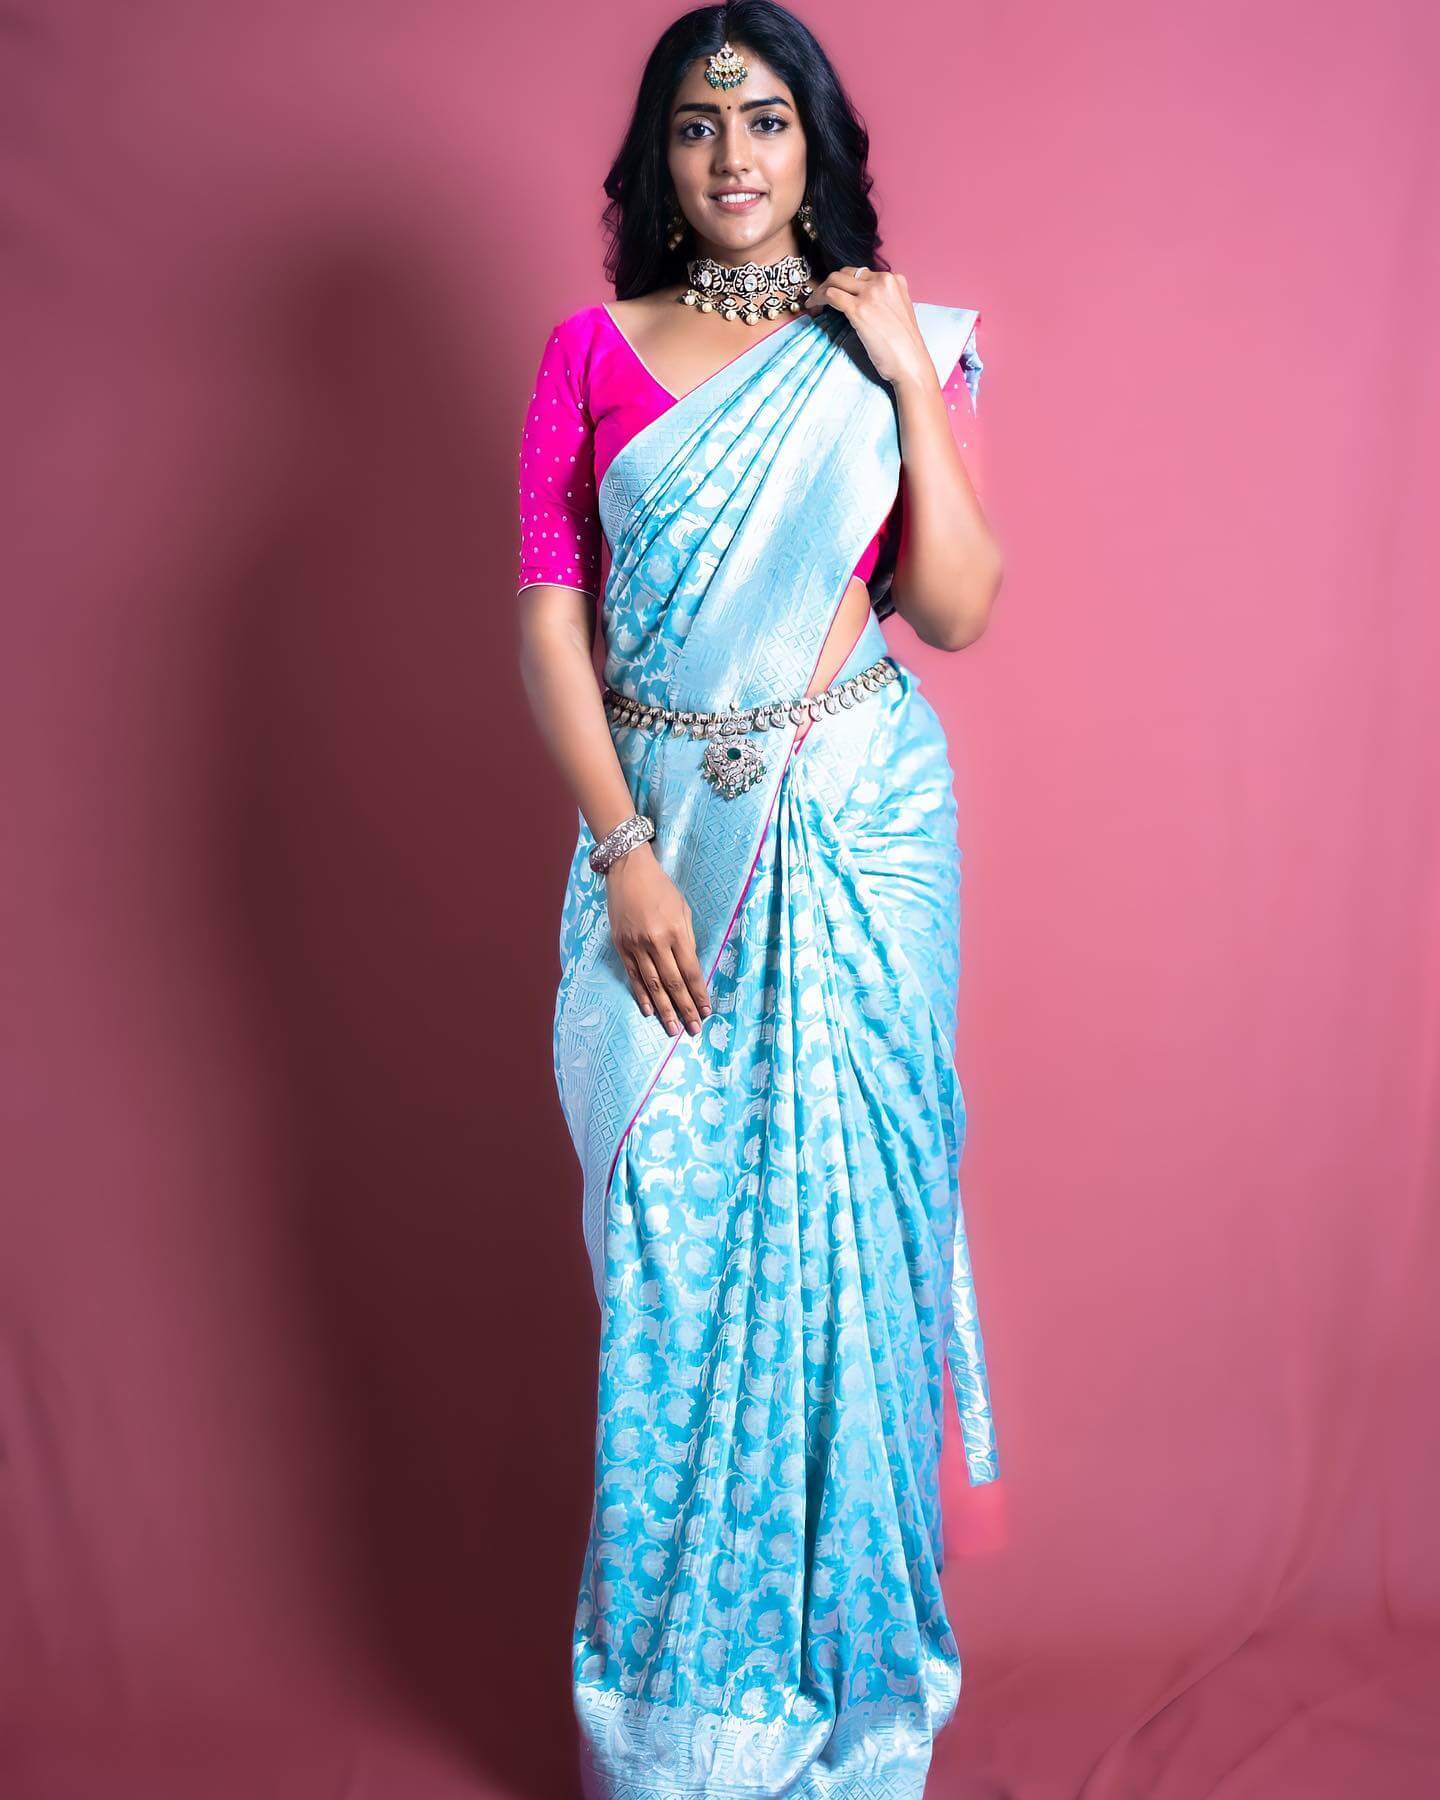 Beauty Diva Eesha Rebba Traditional Look In Ice Blue Silk Saree With Pink Blouse